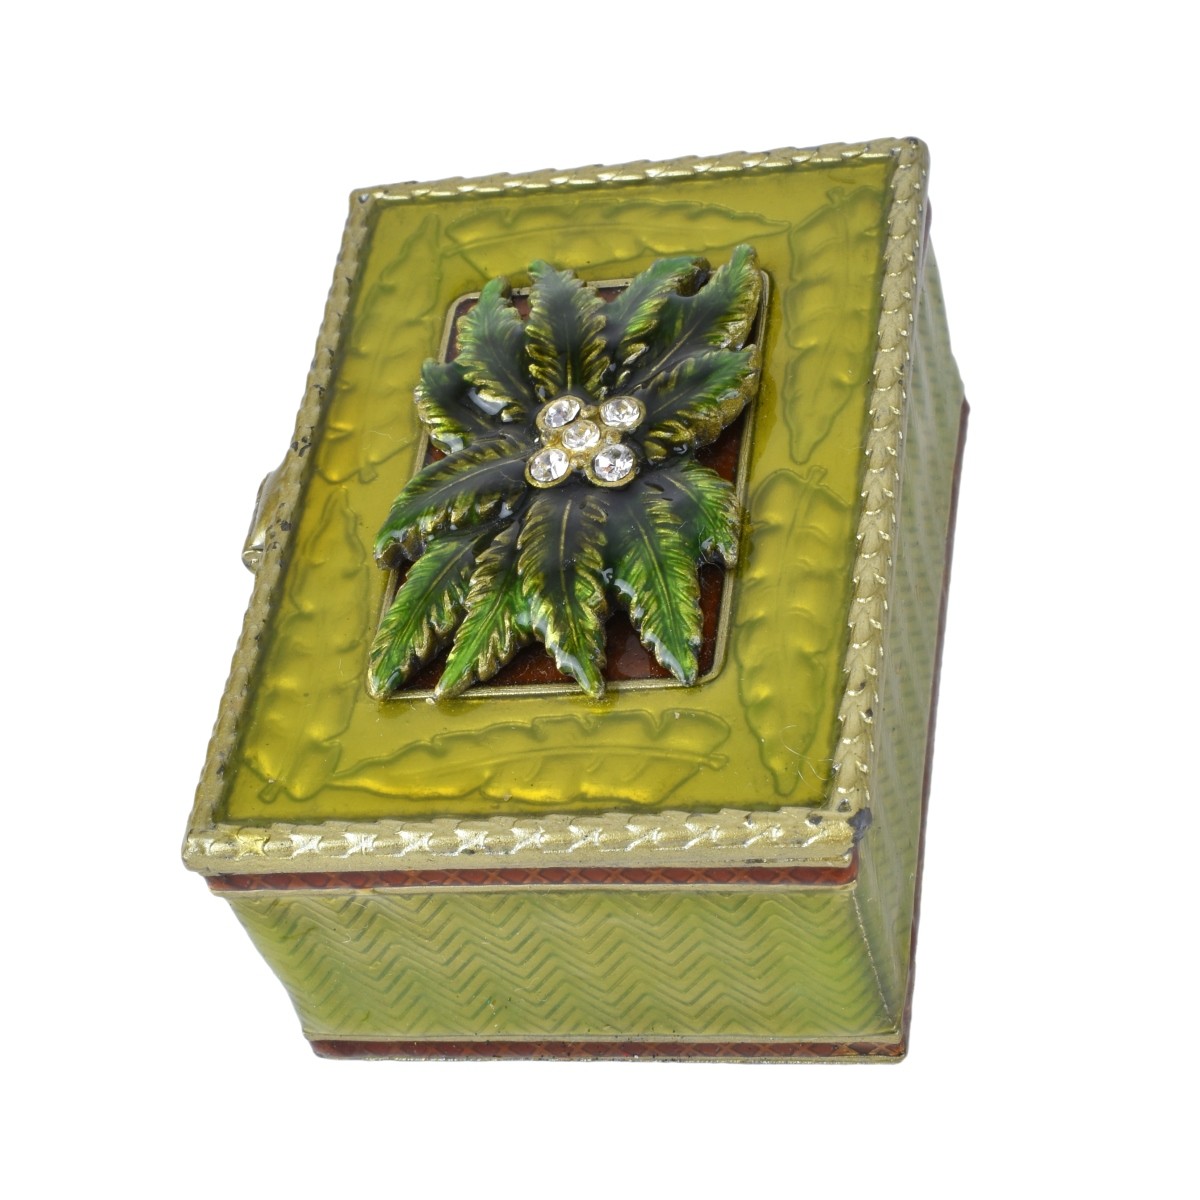 Collection of Six (6) Miniature Boxes